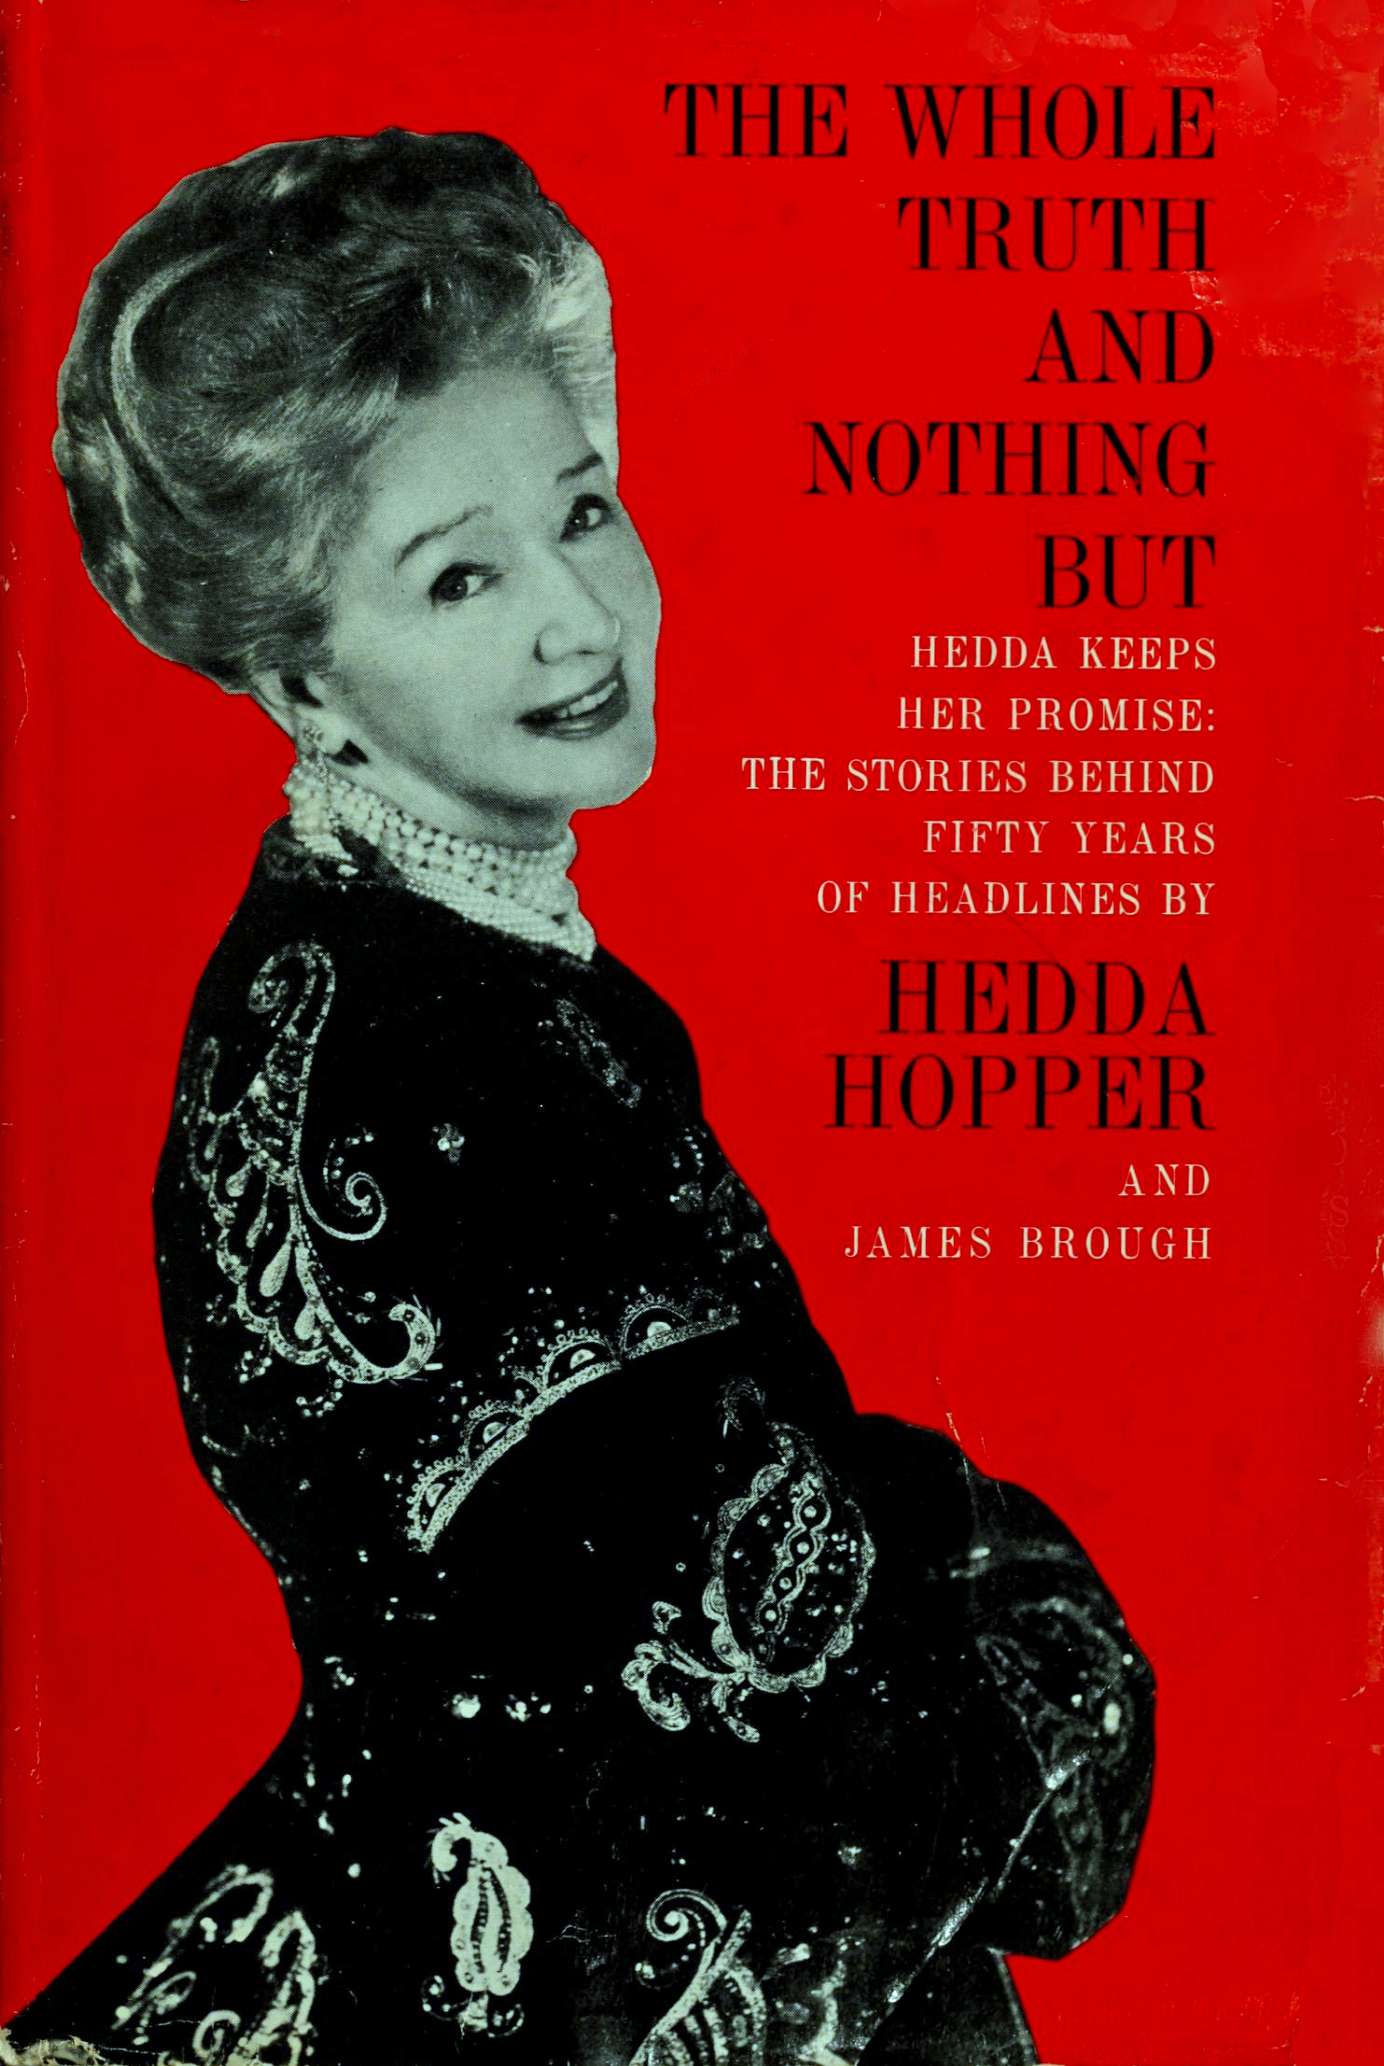 1384px x 2066px - The Whole Truth And Nothing But, by Hedda Hopper and James Broughâ€”A Project  Gutenberg eBook